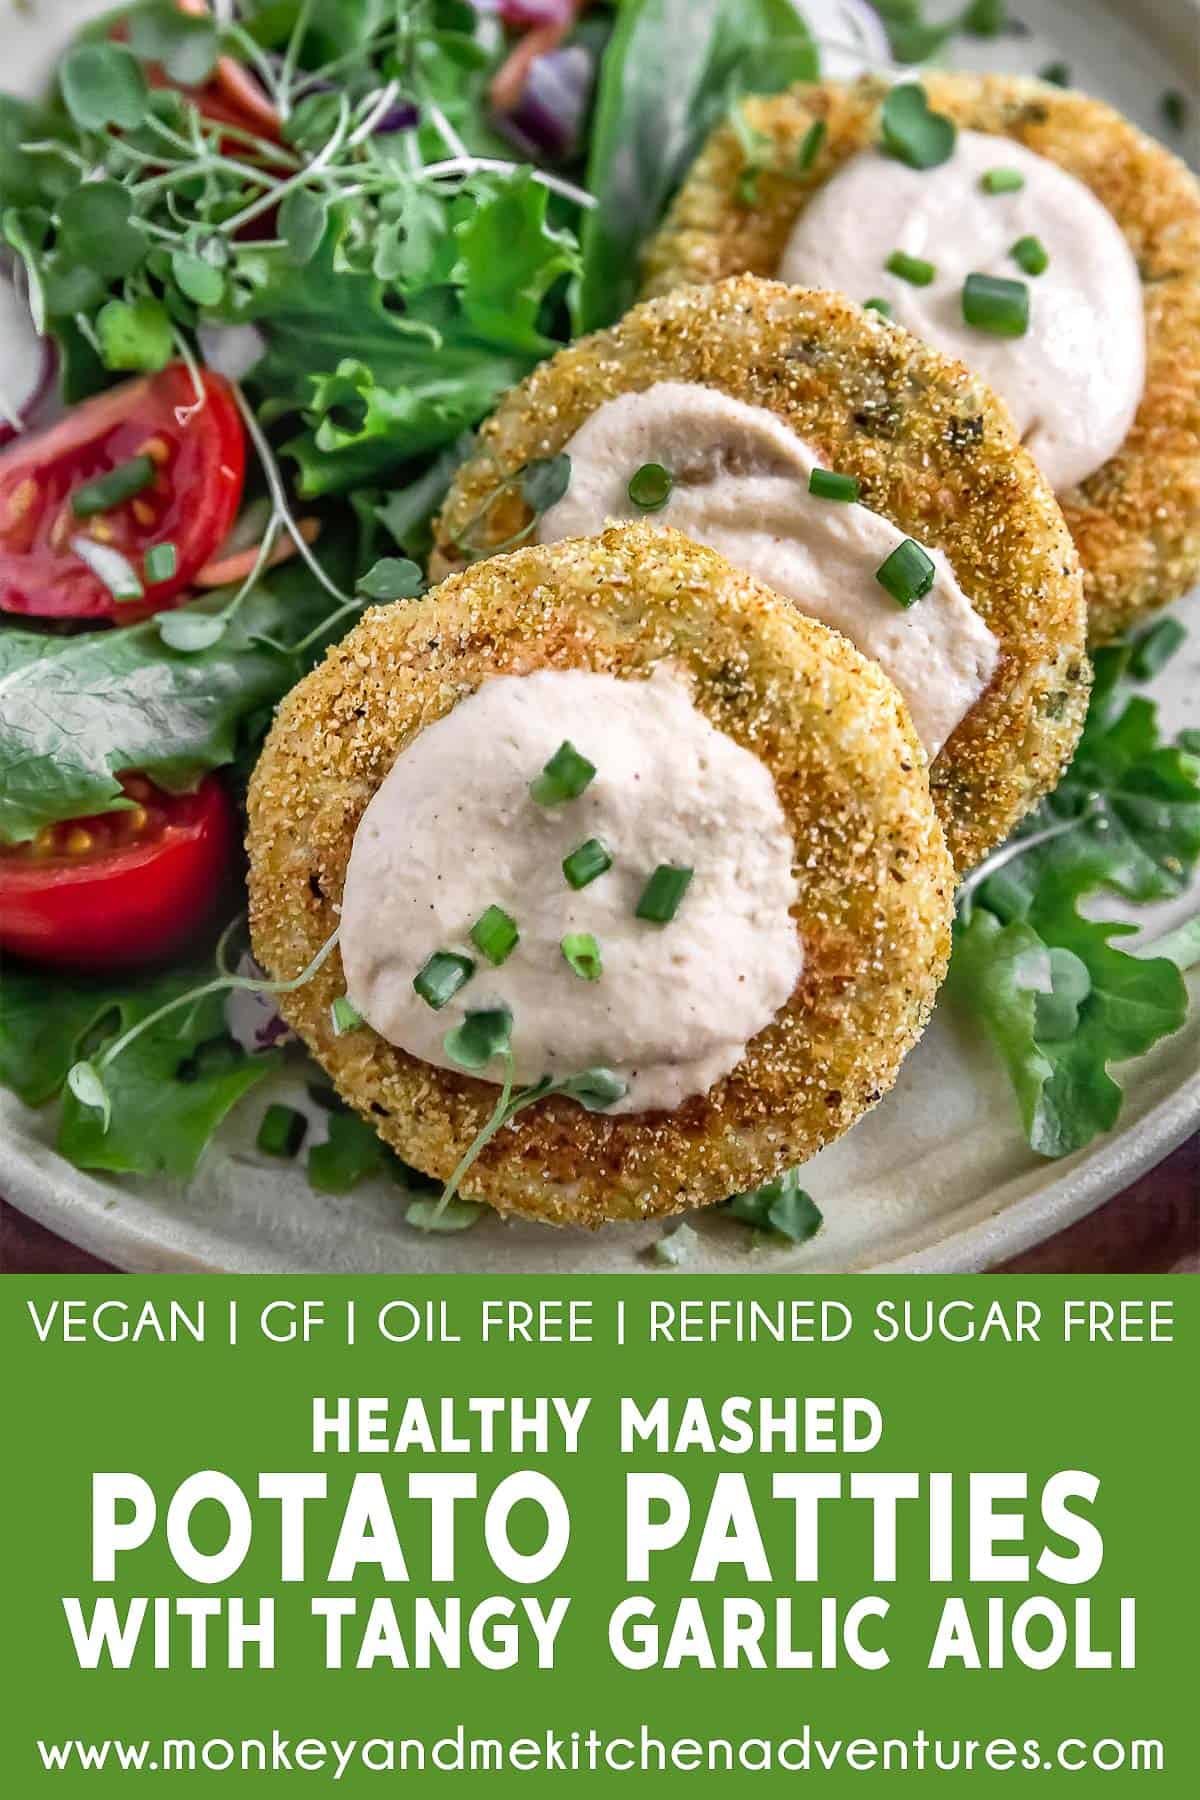 Healthy Mashed Potato Patties with Tangy Garlic Aioli with text description